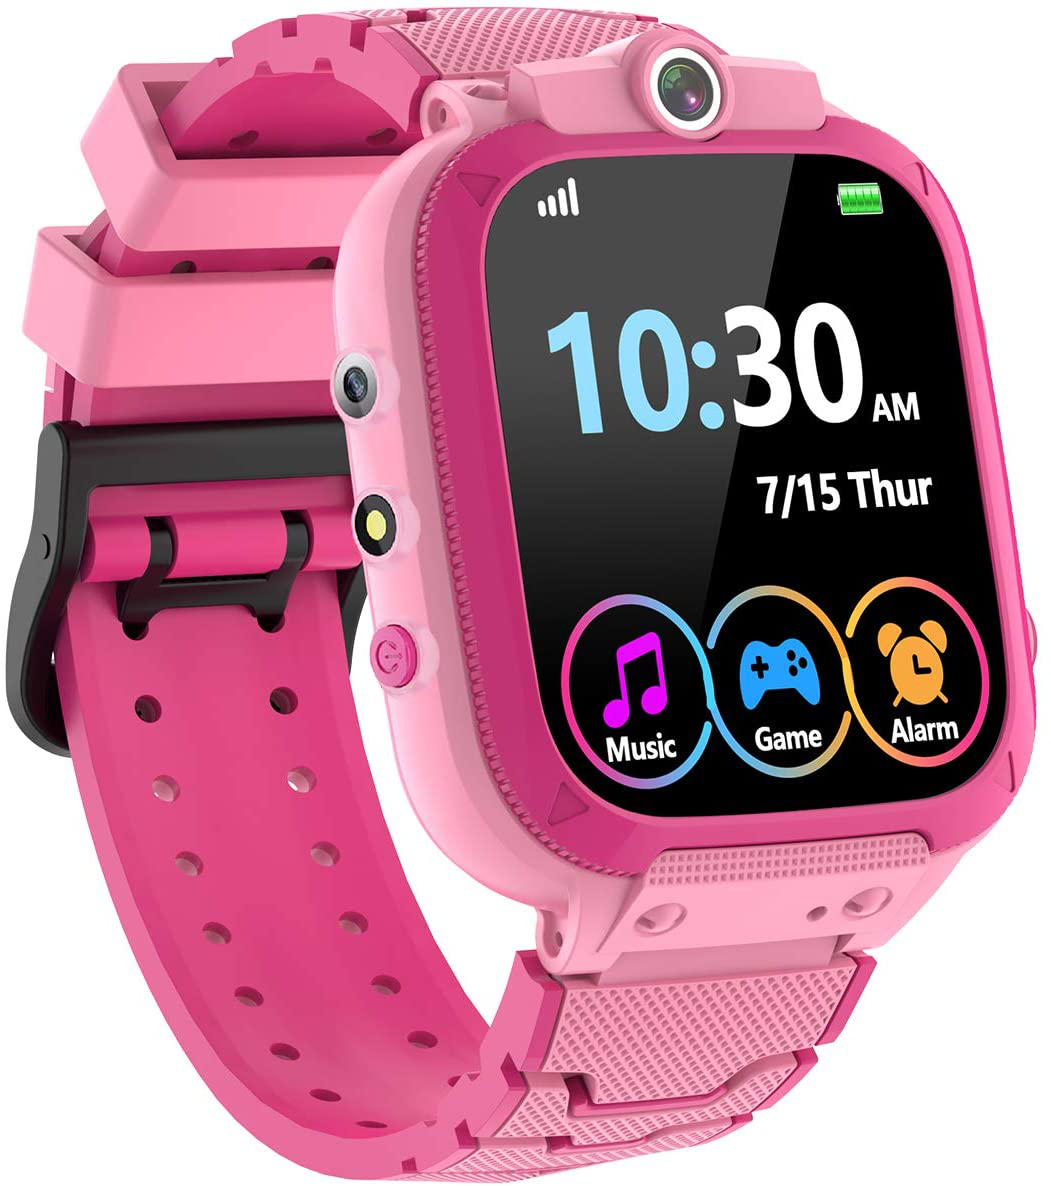 Kids Game Smart Watch for Boys Girls with 1.44" HD Touch Screen 14 Puzzle Games Music Player Dual Camera Video Recording 12/24 Hr Pedometer Alarm Clock Calculator Flashlight Birthday Educational Toys